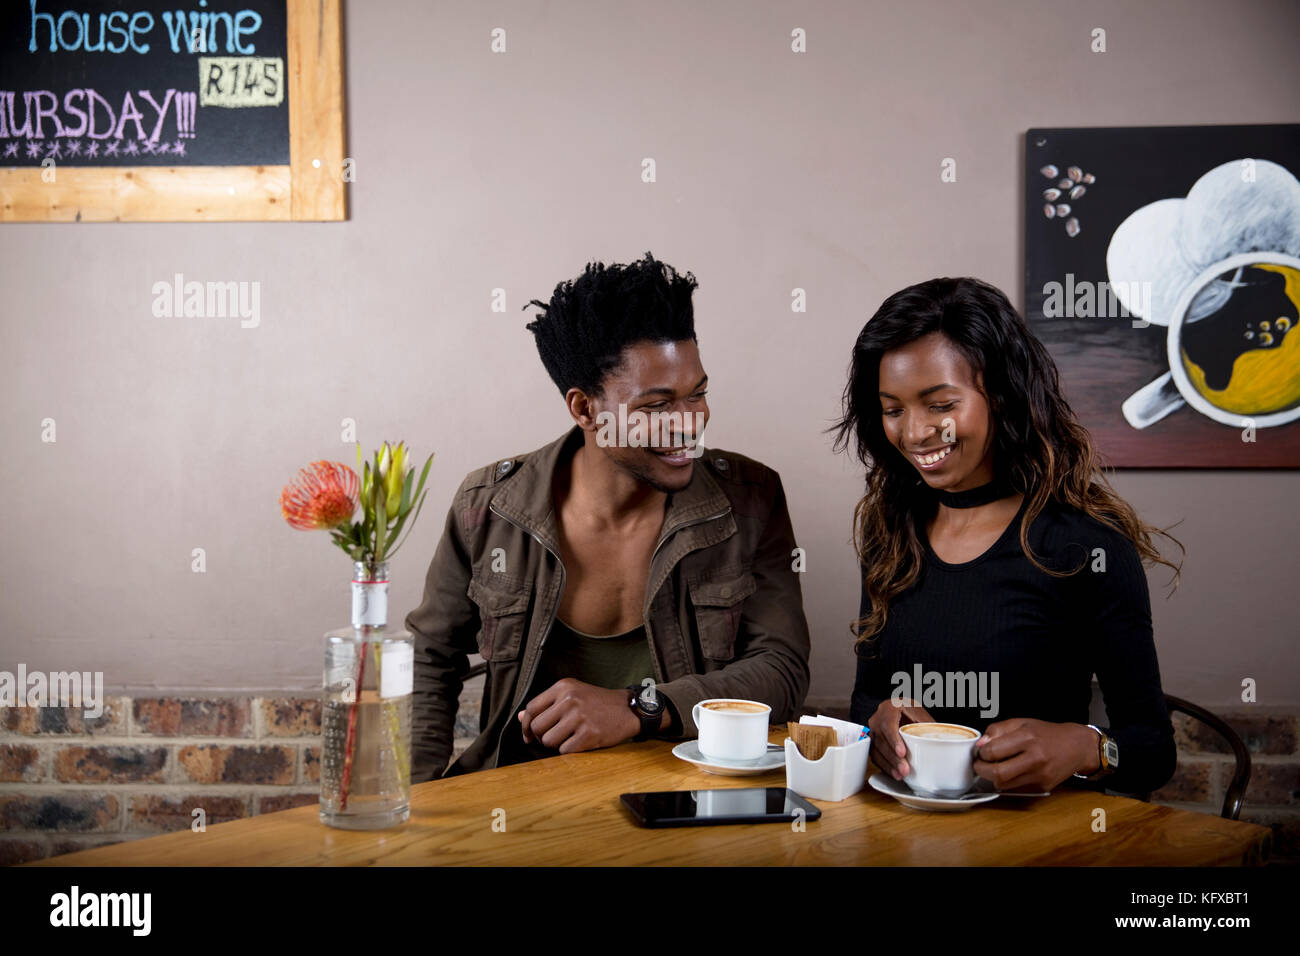 Couple having coffee together Stock Photo